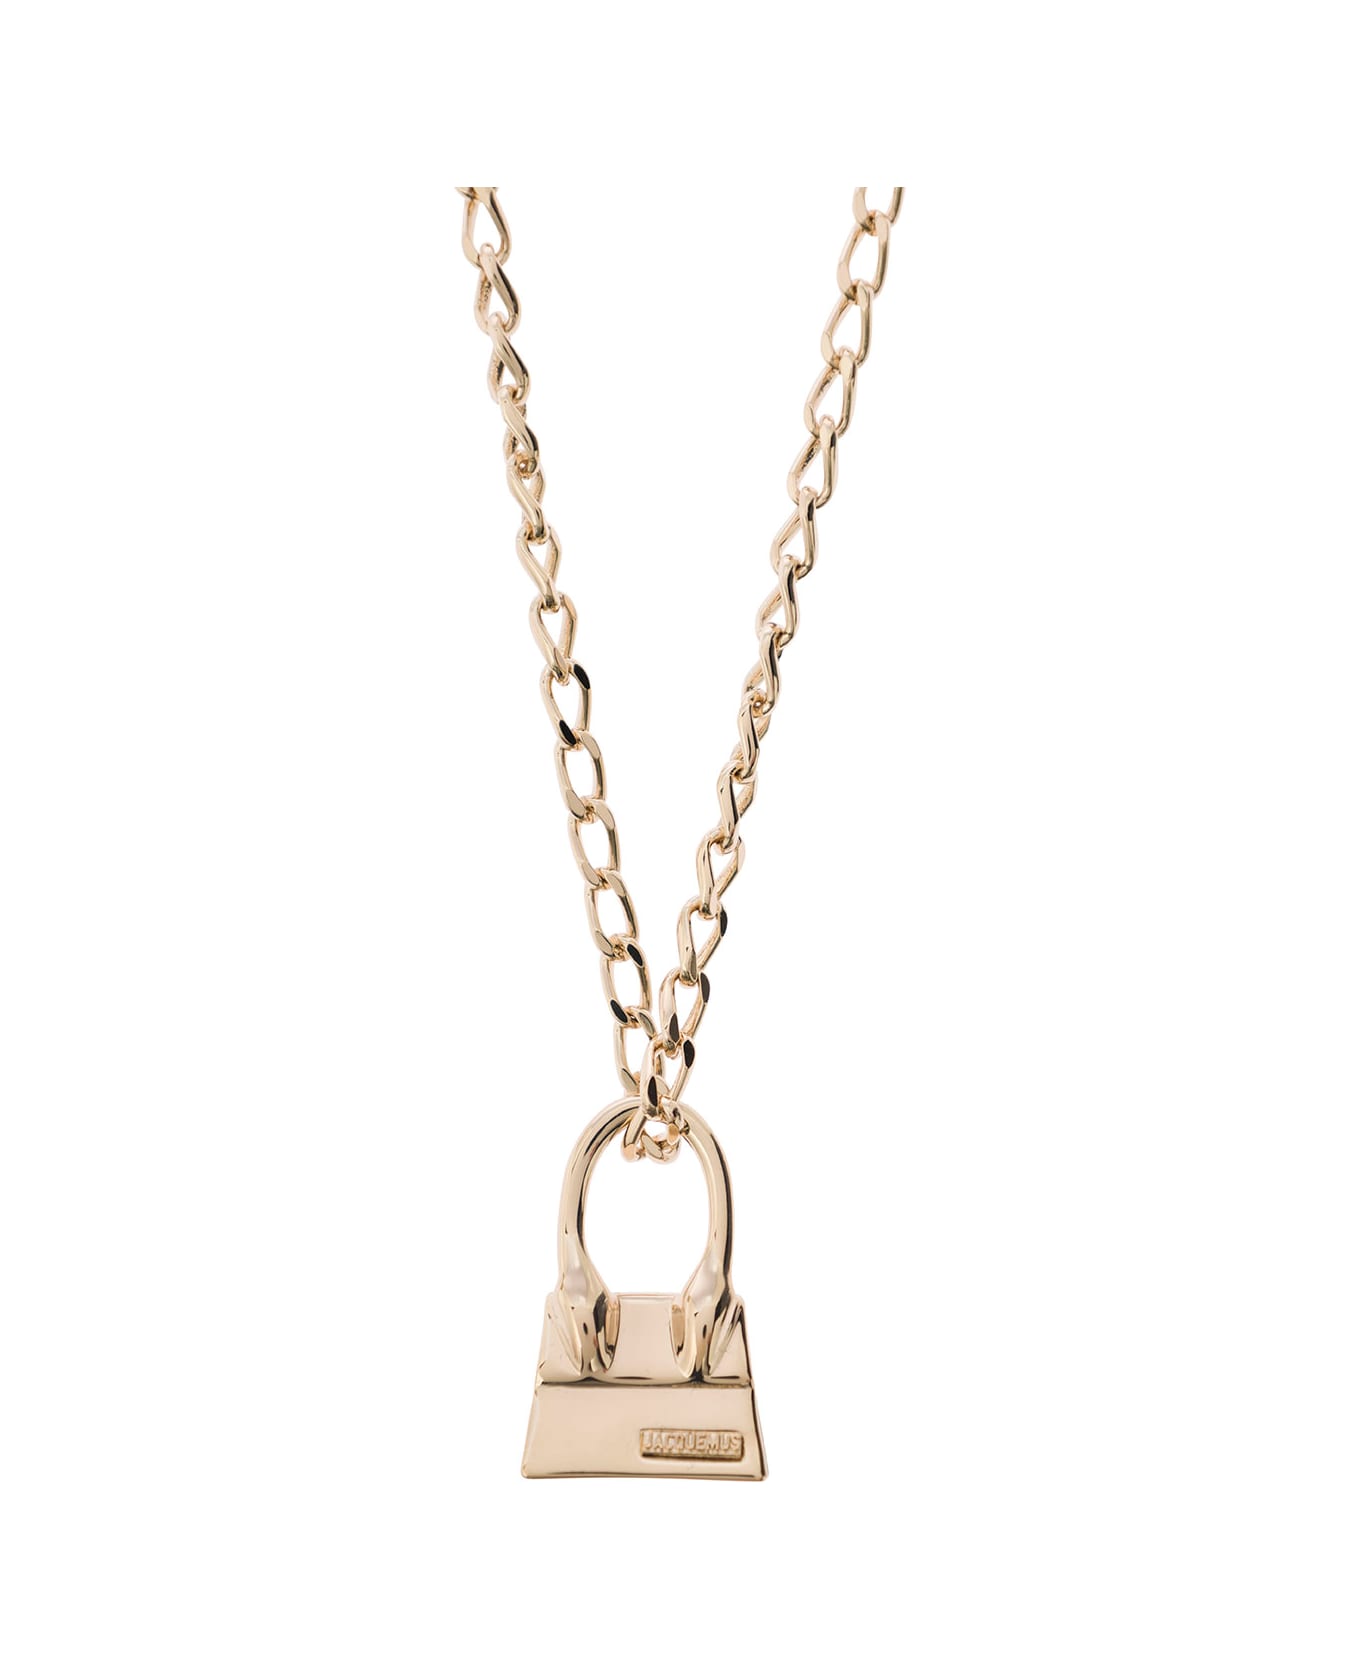 Jacquemus Le Collier Chiquito Necklace - Metallic ネックレス